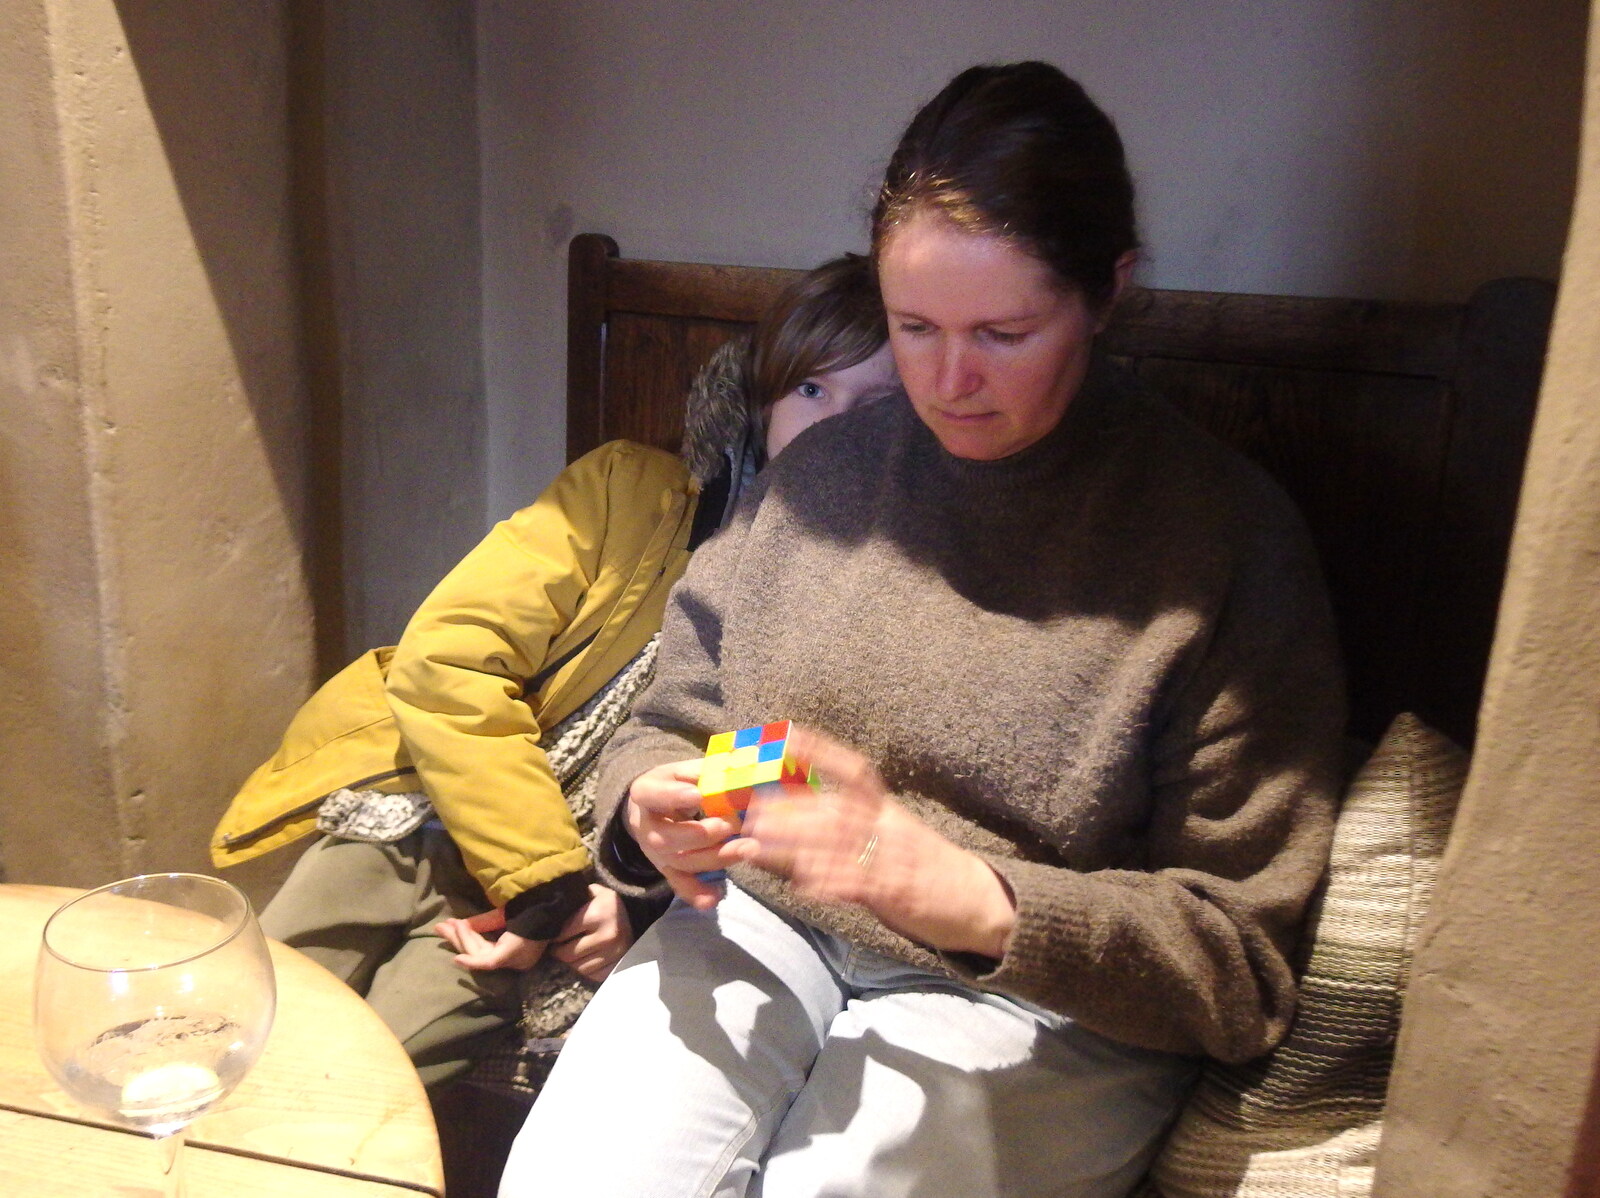 Harry hides as Isobel does some cubing from A Trip to Ampersand, Sawmills Road, Diss - 27th January 2023